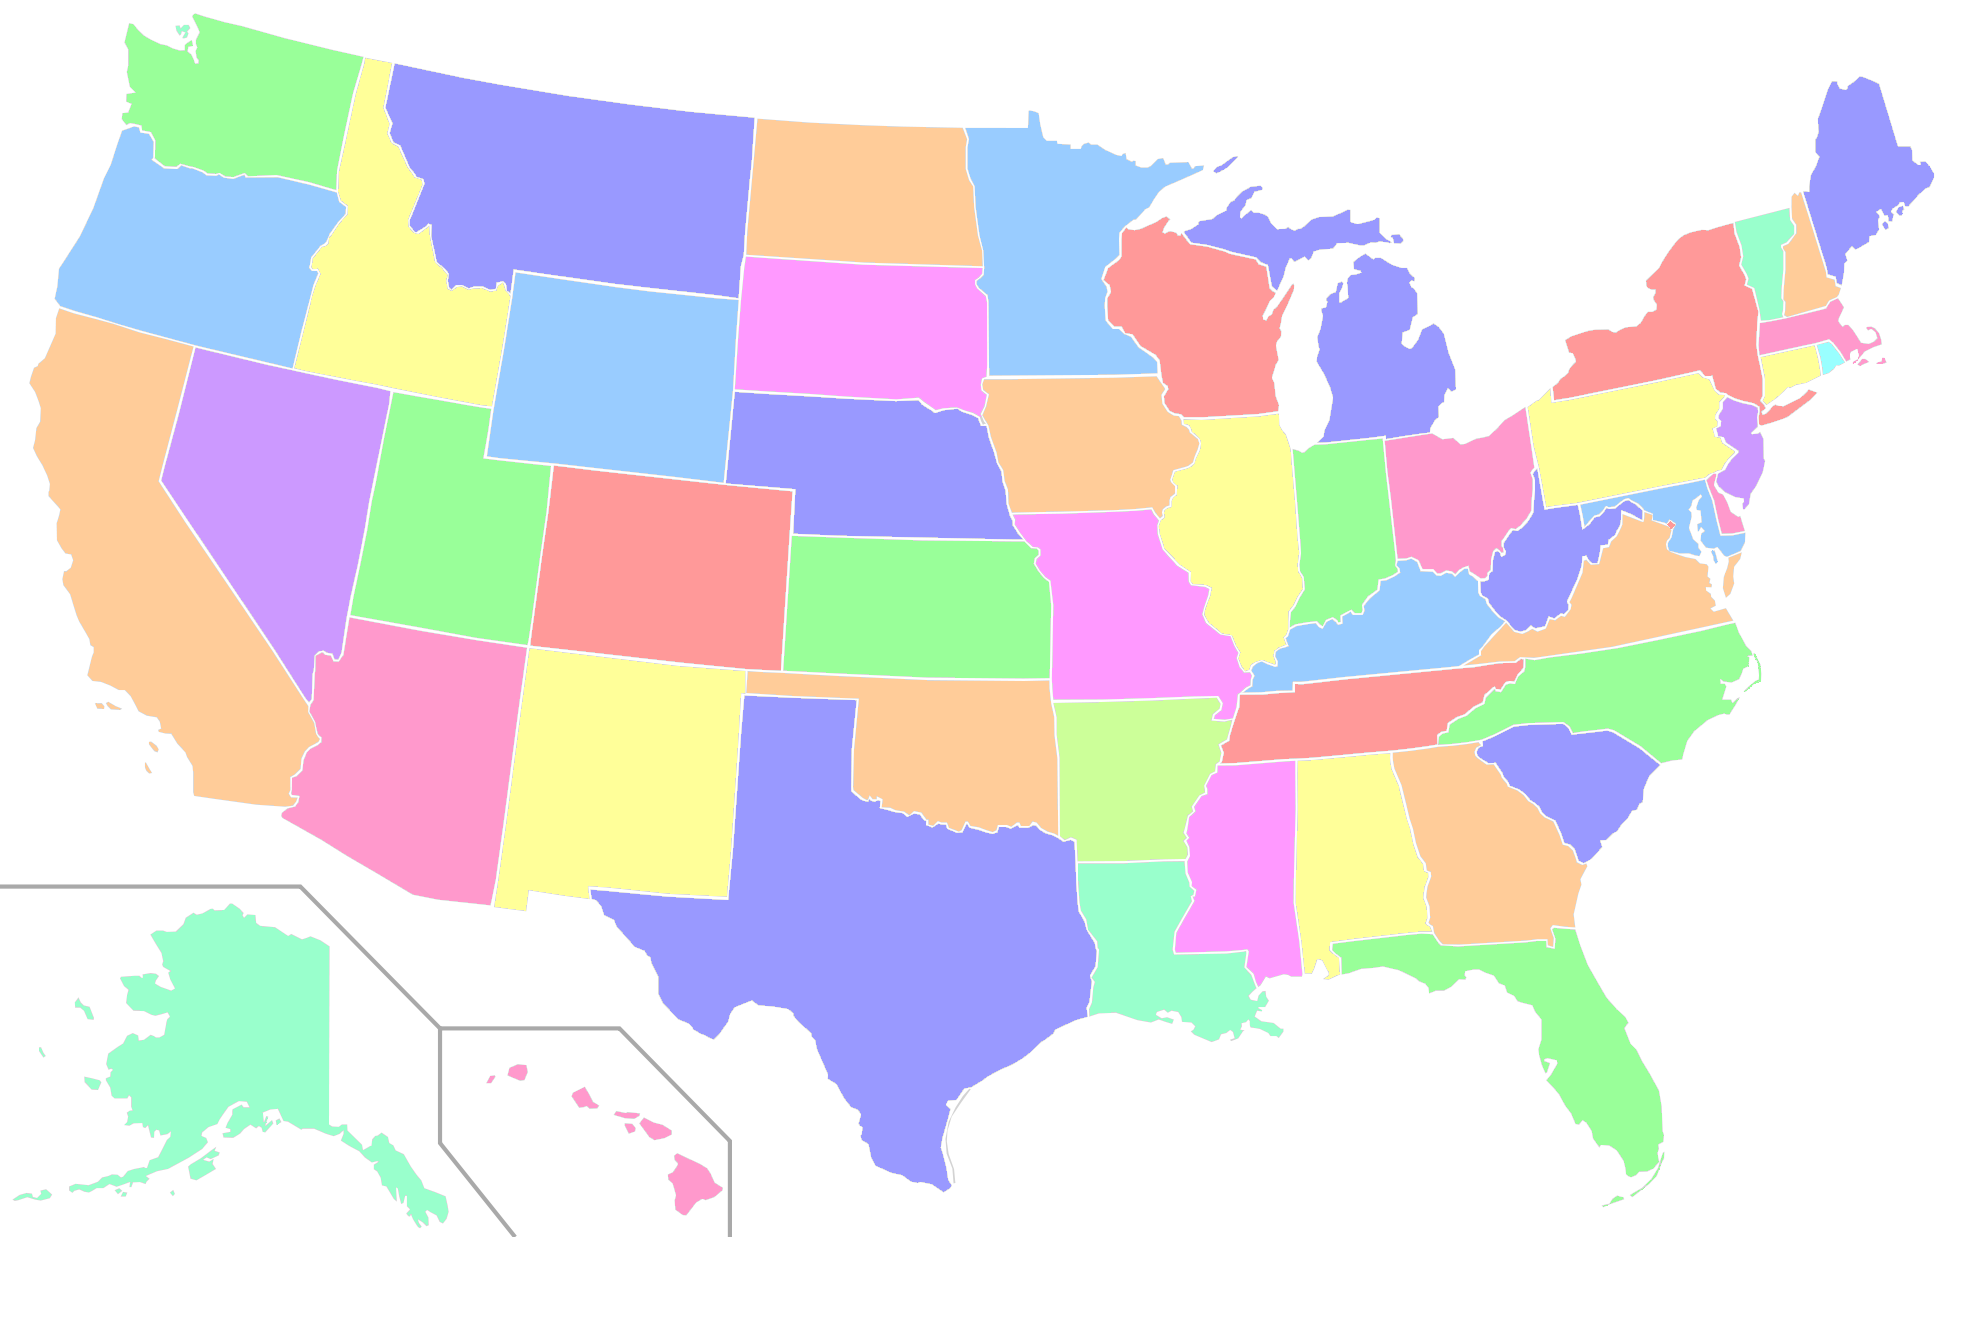 US Map of States - Dr. Odd